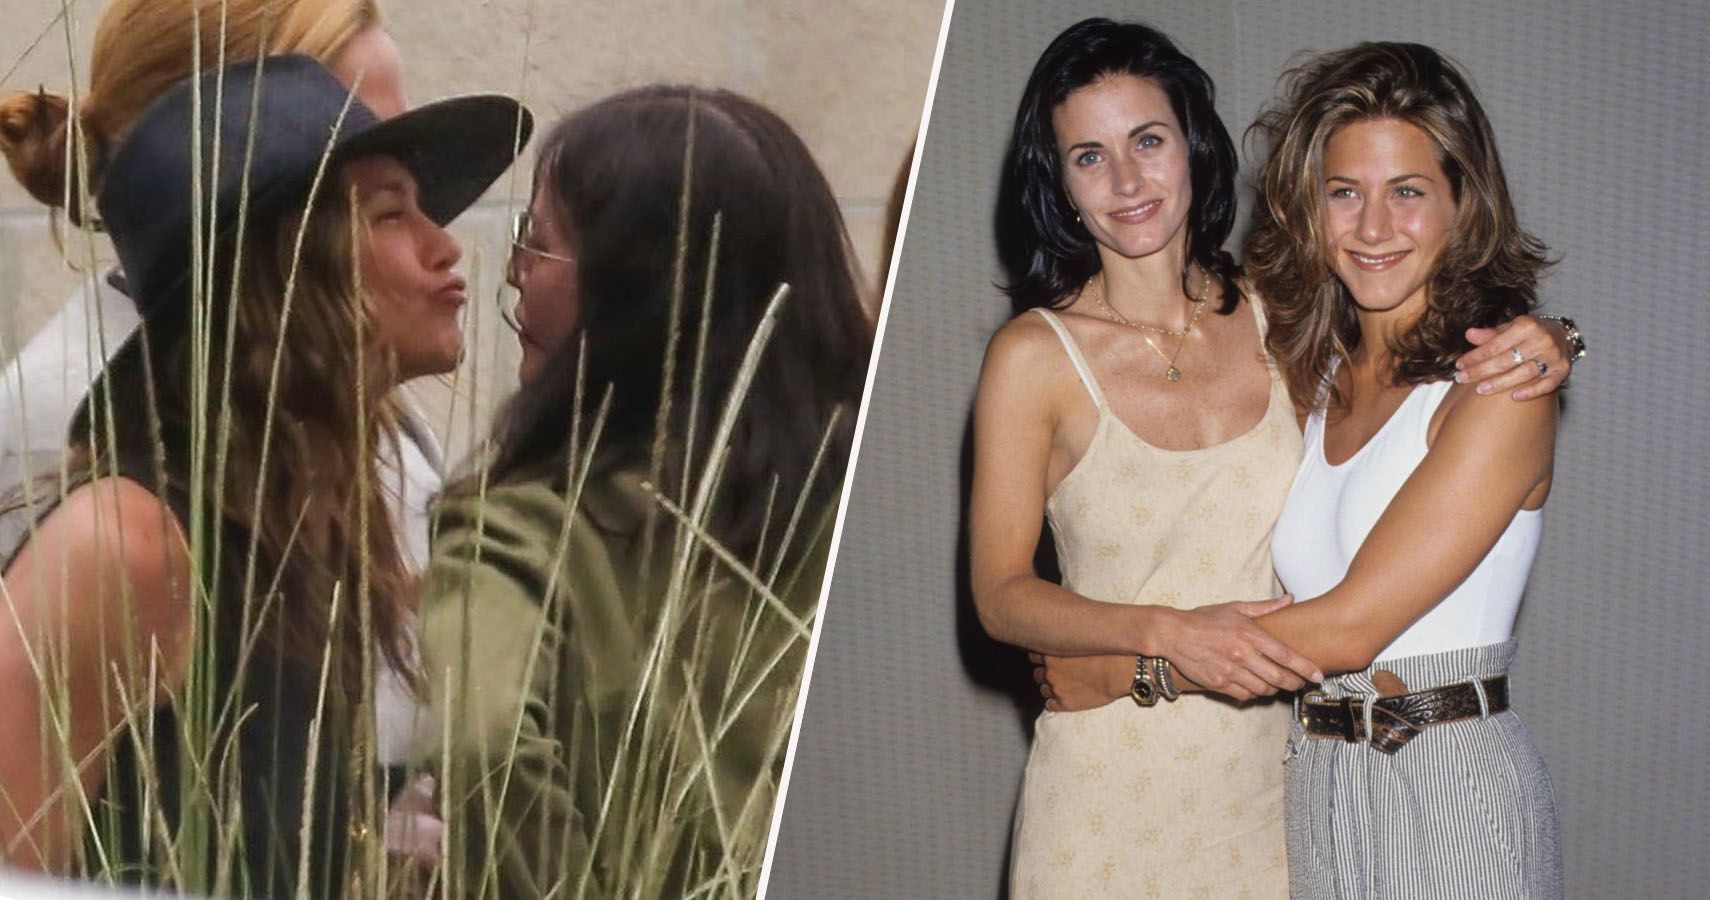 14 Pics Of Jennifer Aniston And Courteney Cox Showing Their True Friendship